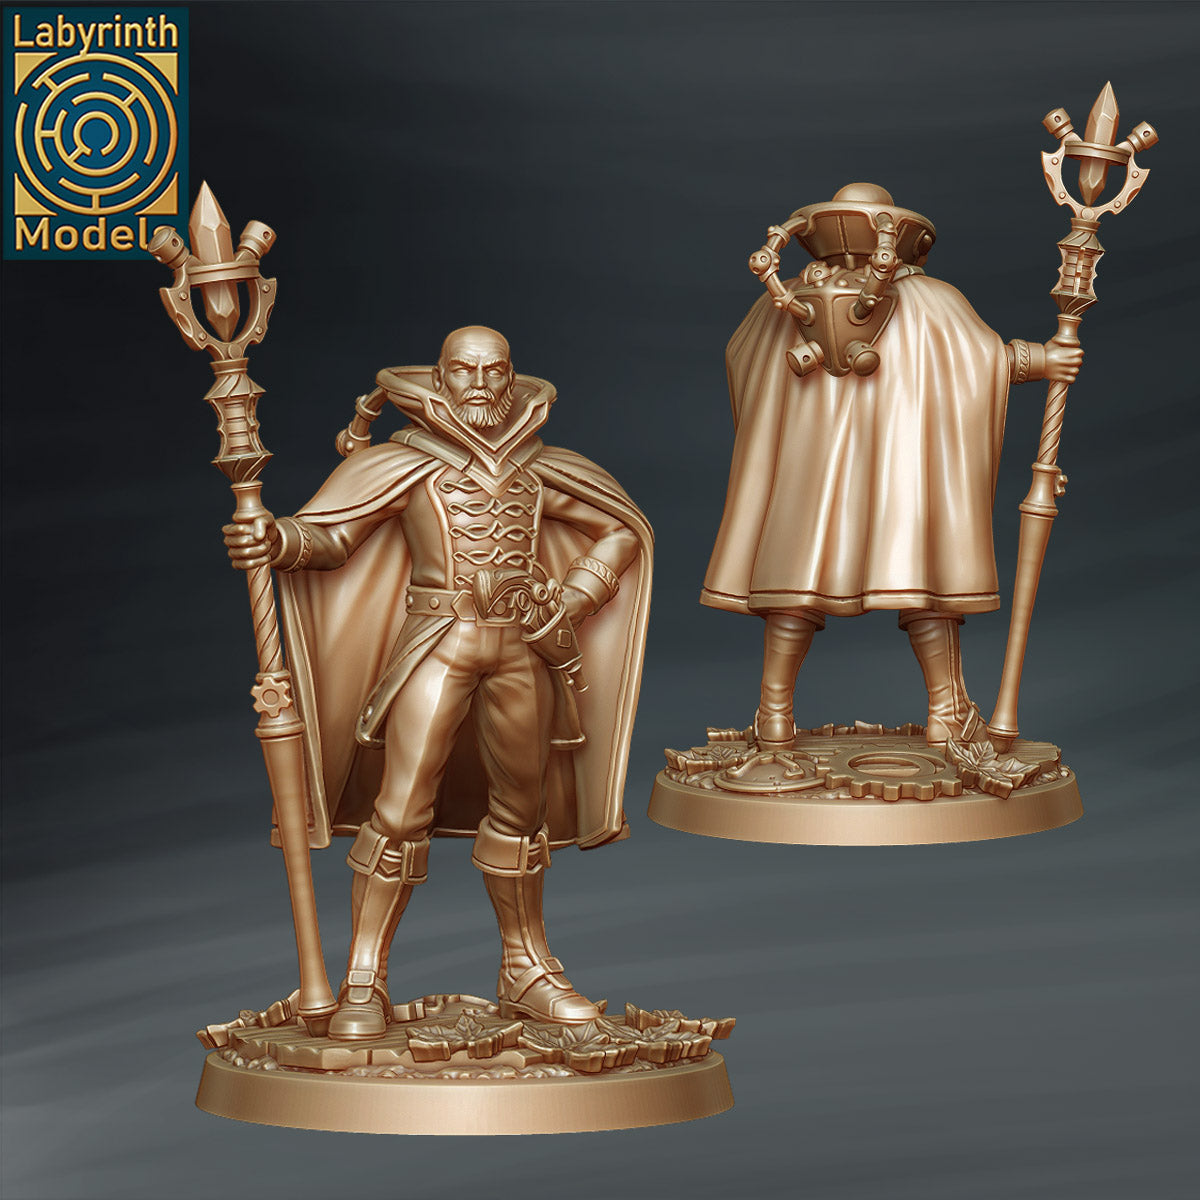 Master Mage by Labyrinth Models